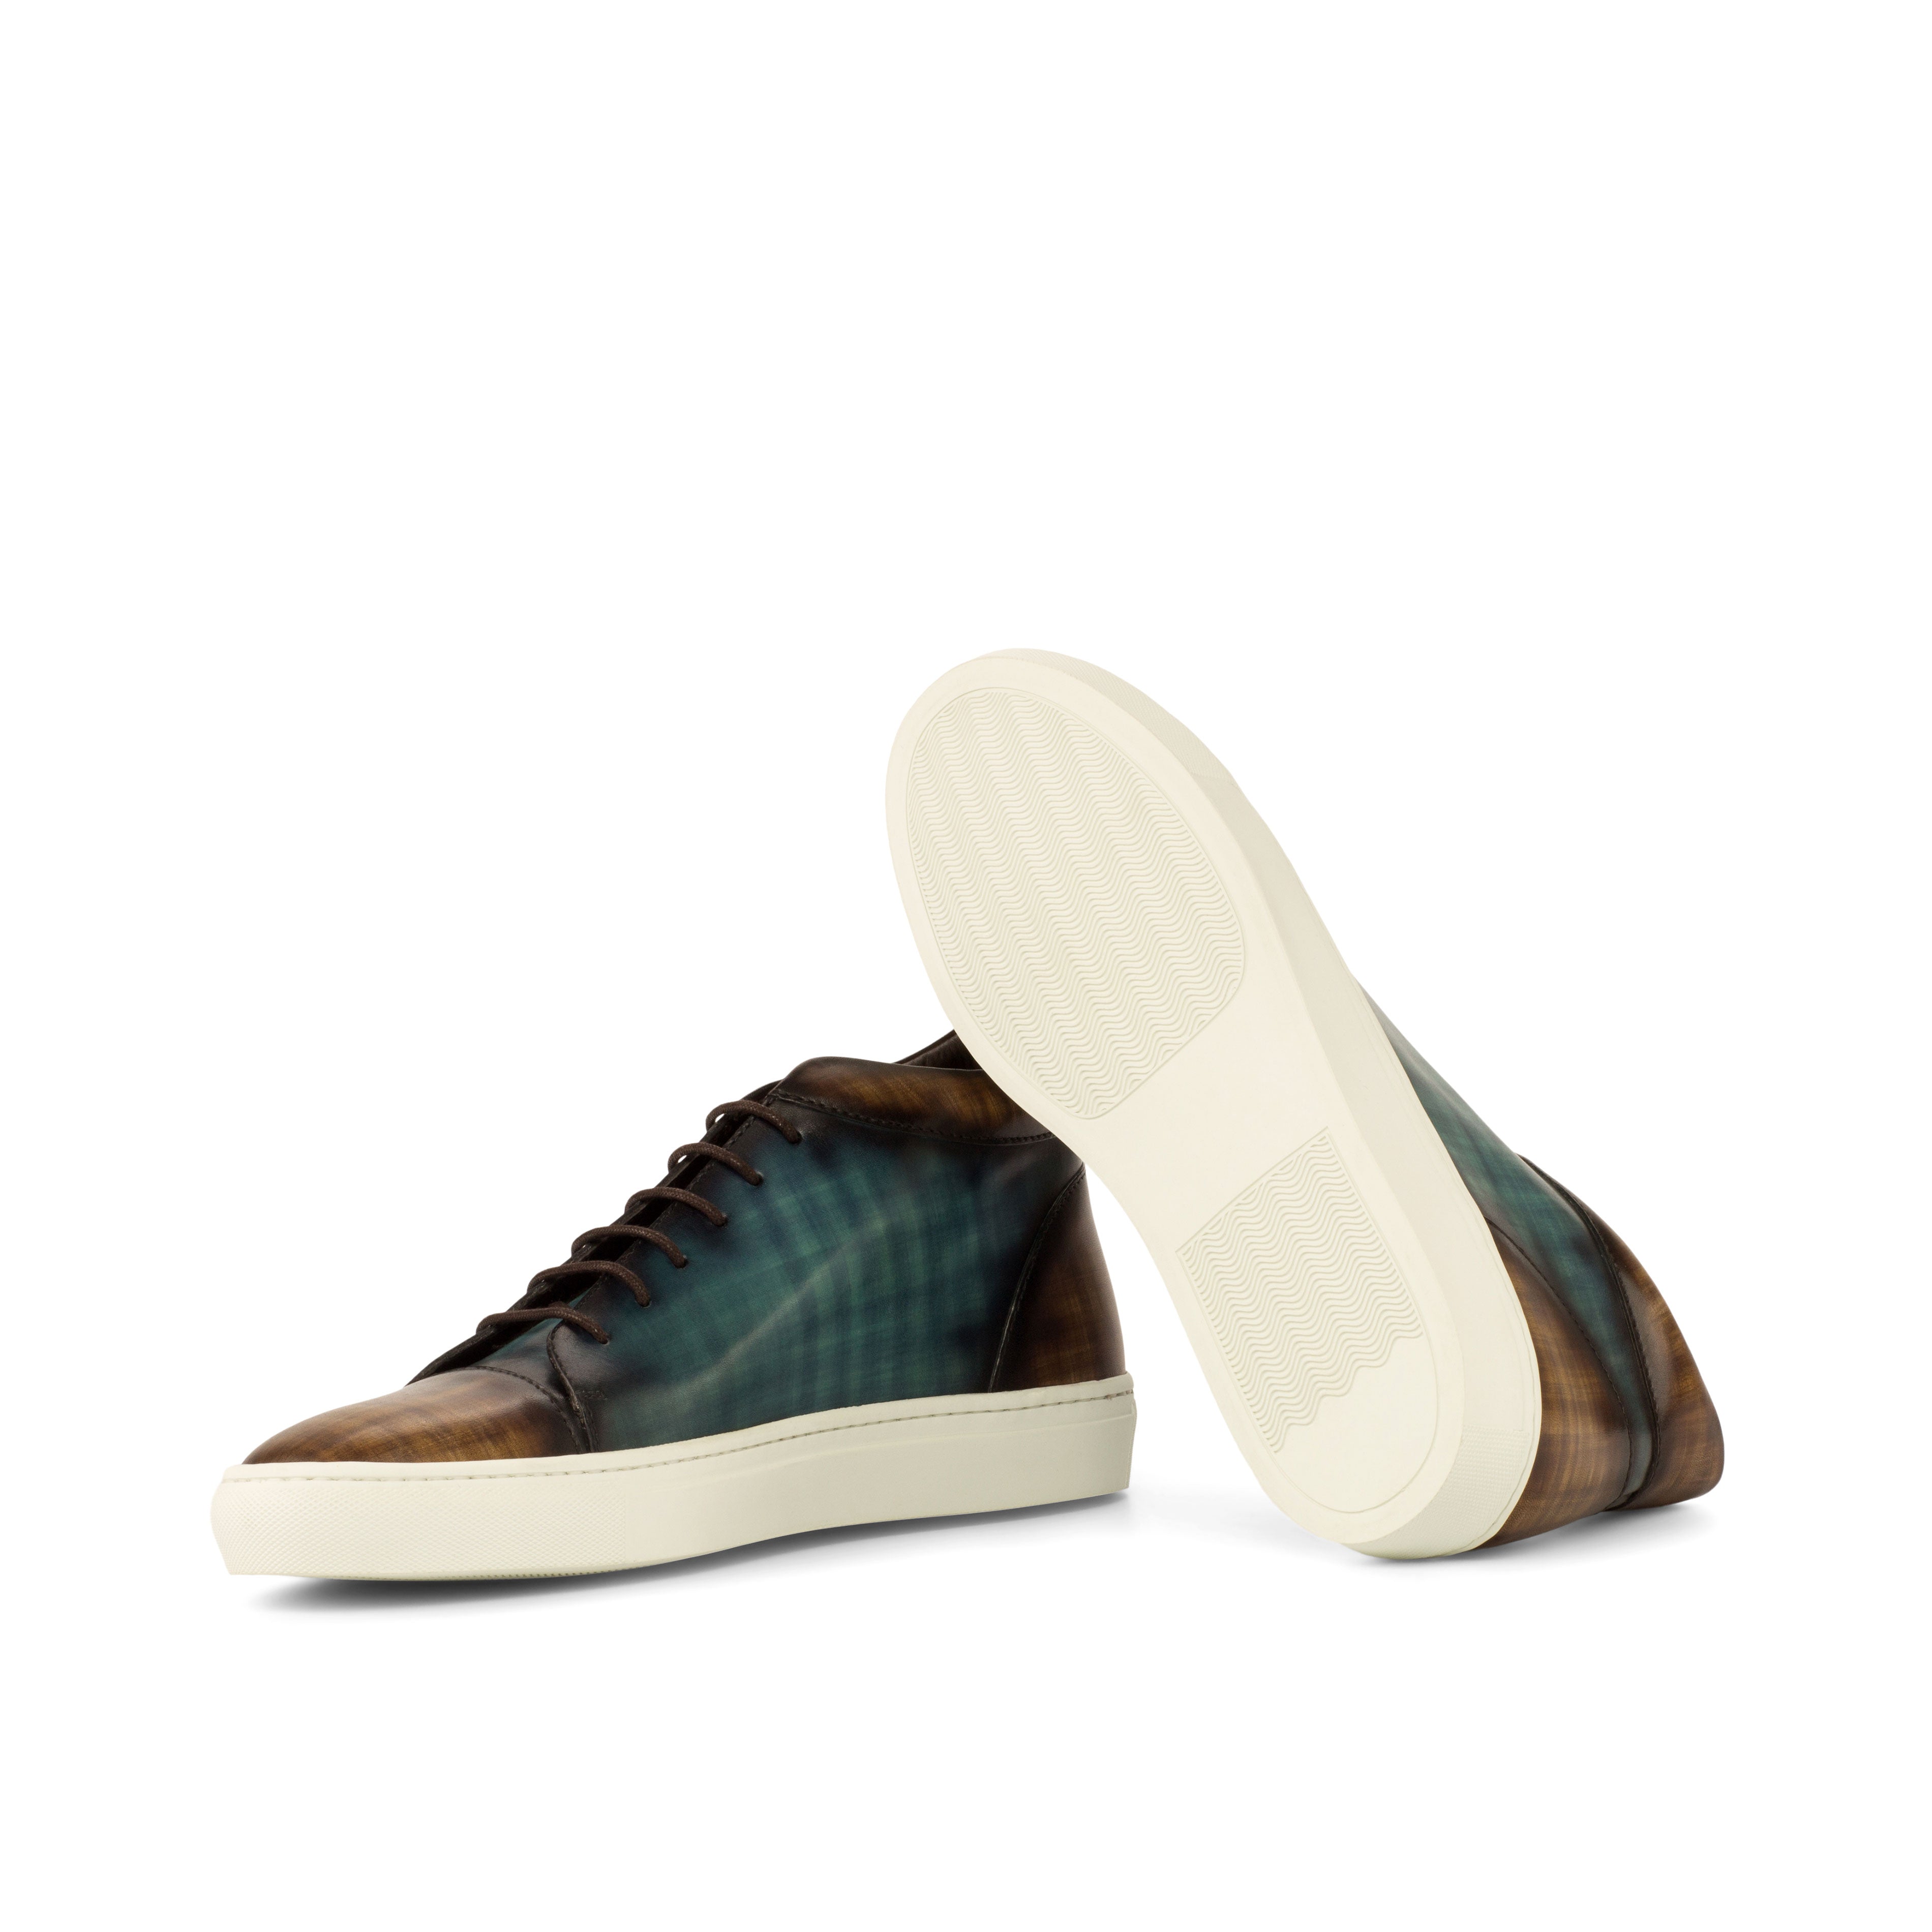 Turquoise and Brown Patina High Top